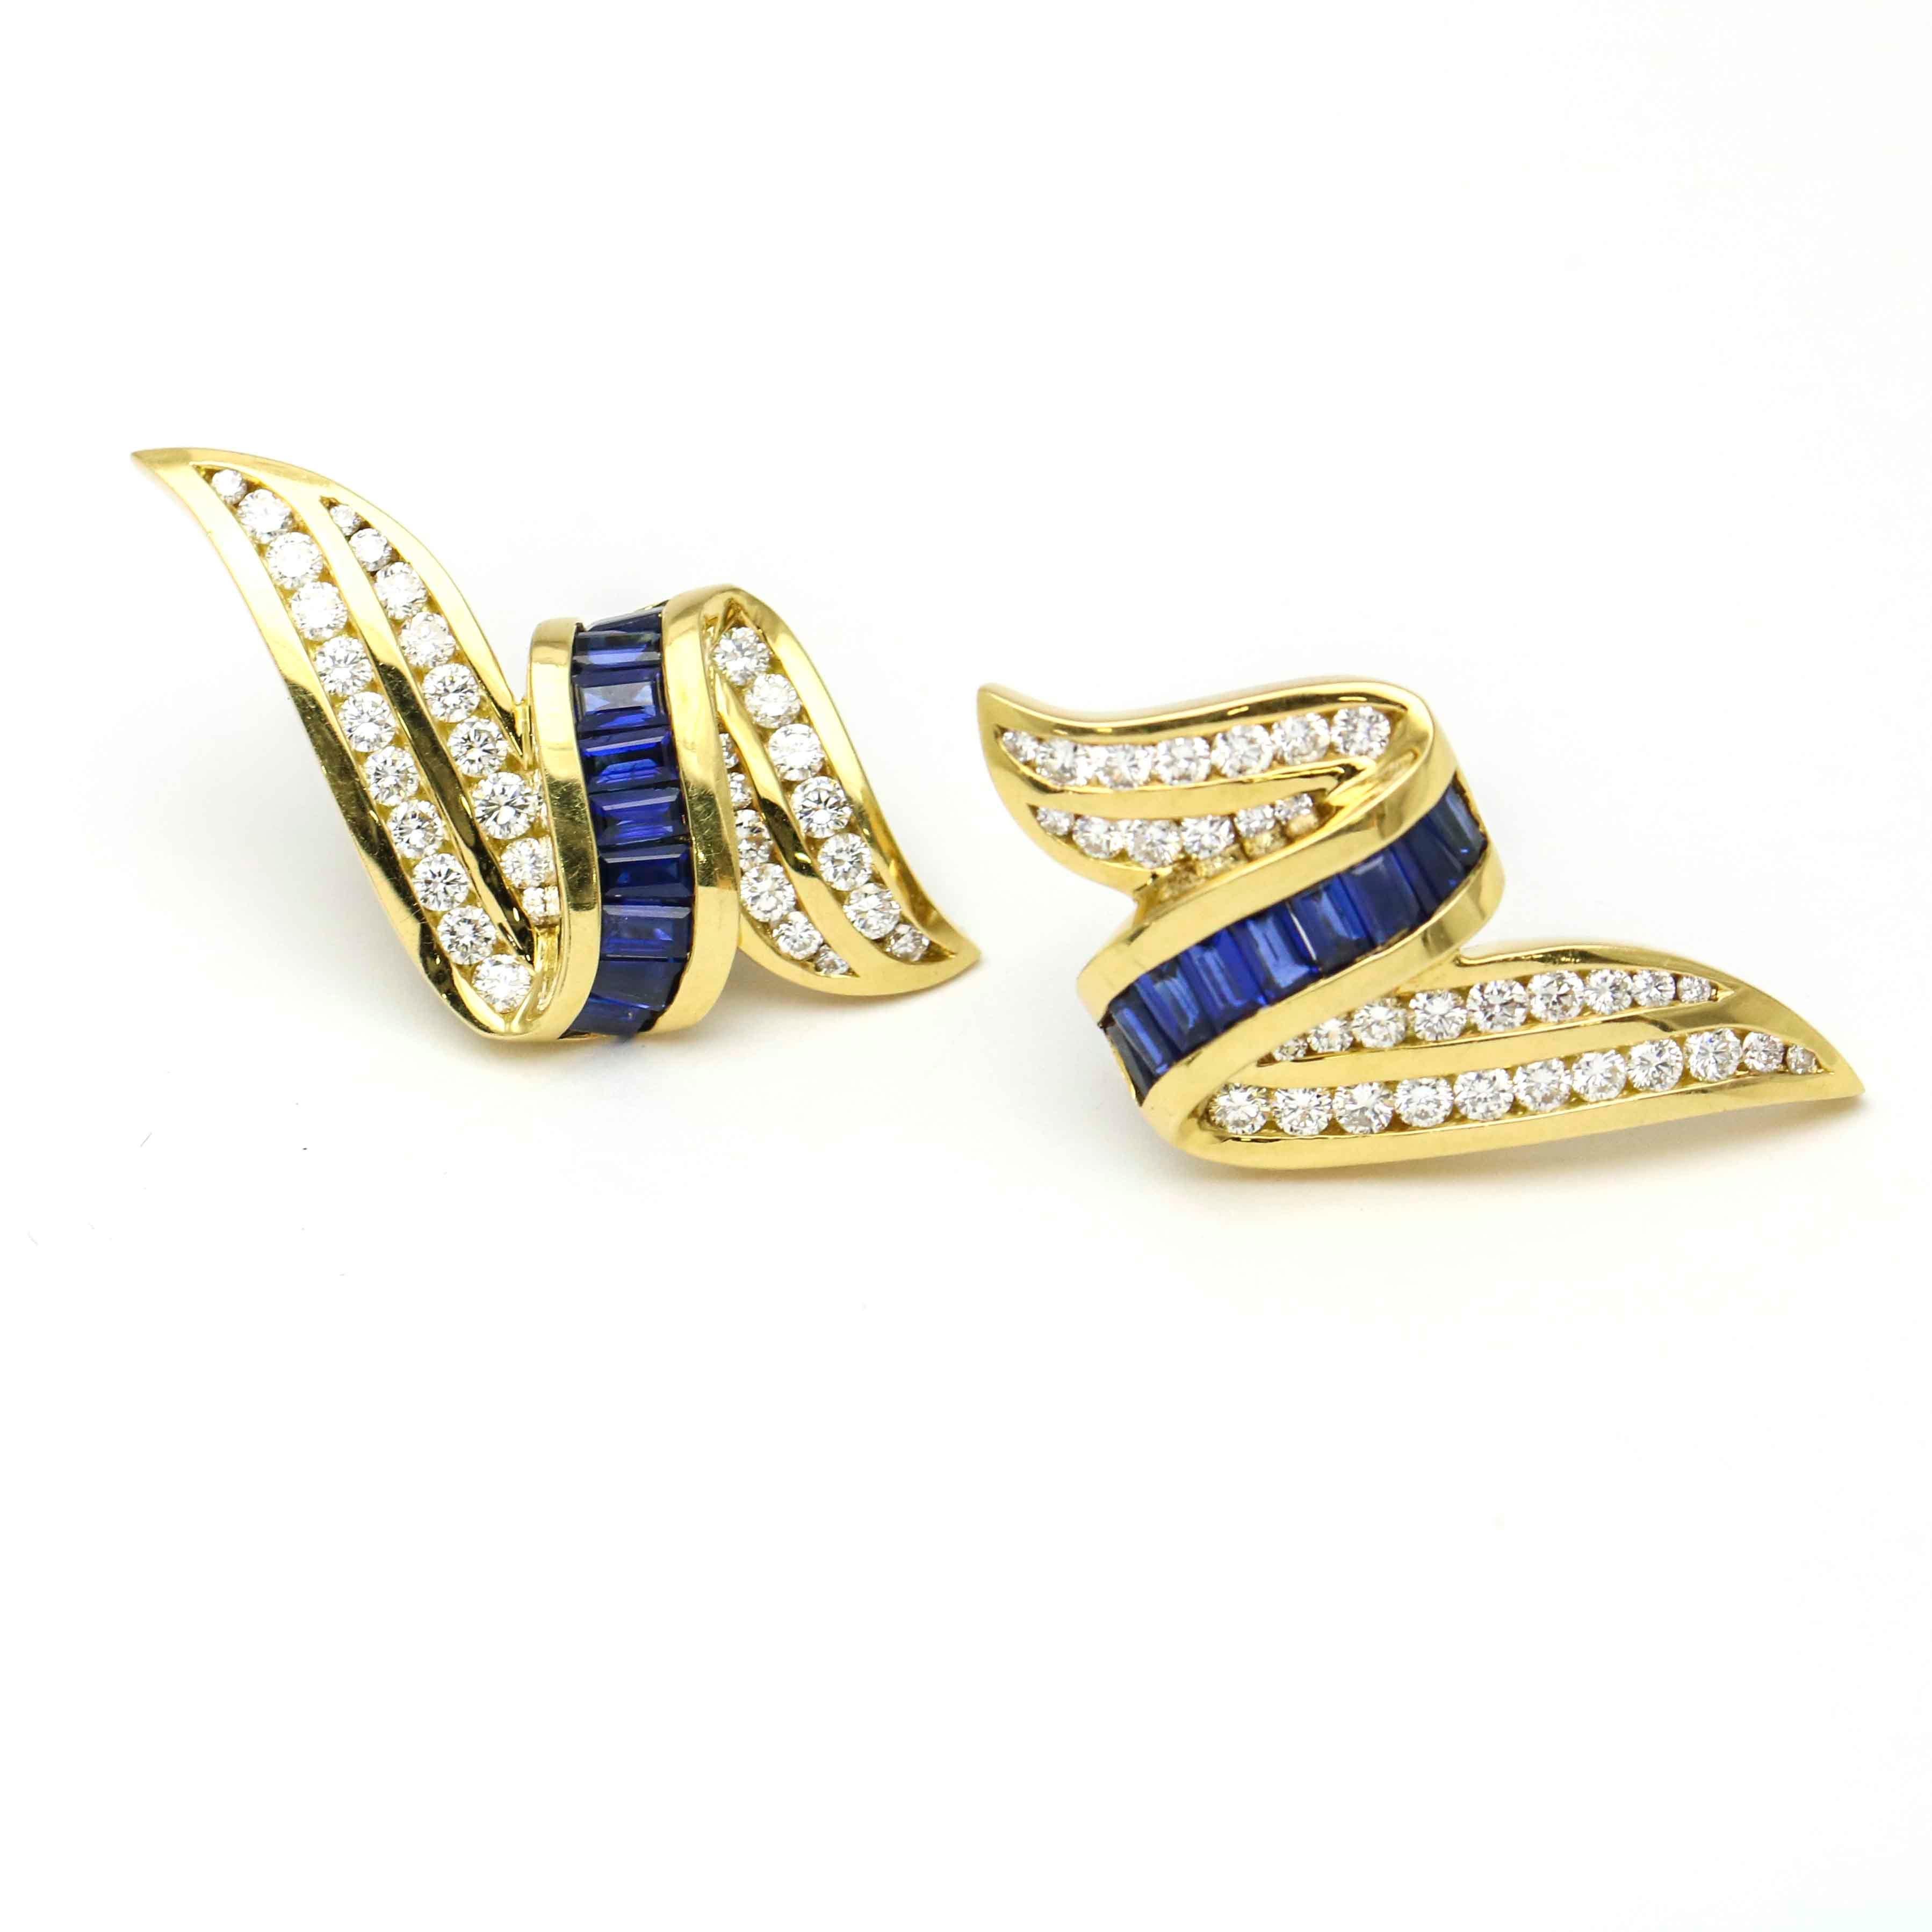 Elegant diamond and blue sapphire ribbon motif earclips by Charles Krypell. The earrings are crafted in 18 karat yellow gold channel-set with round diamonds and baguette-cut natural sapphires. 